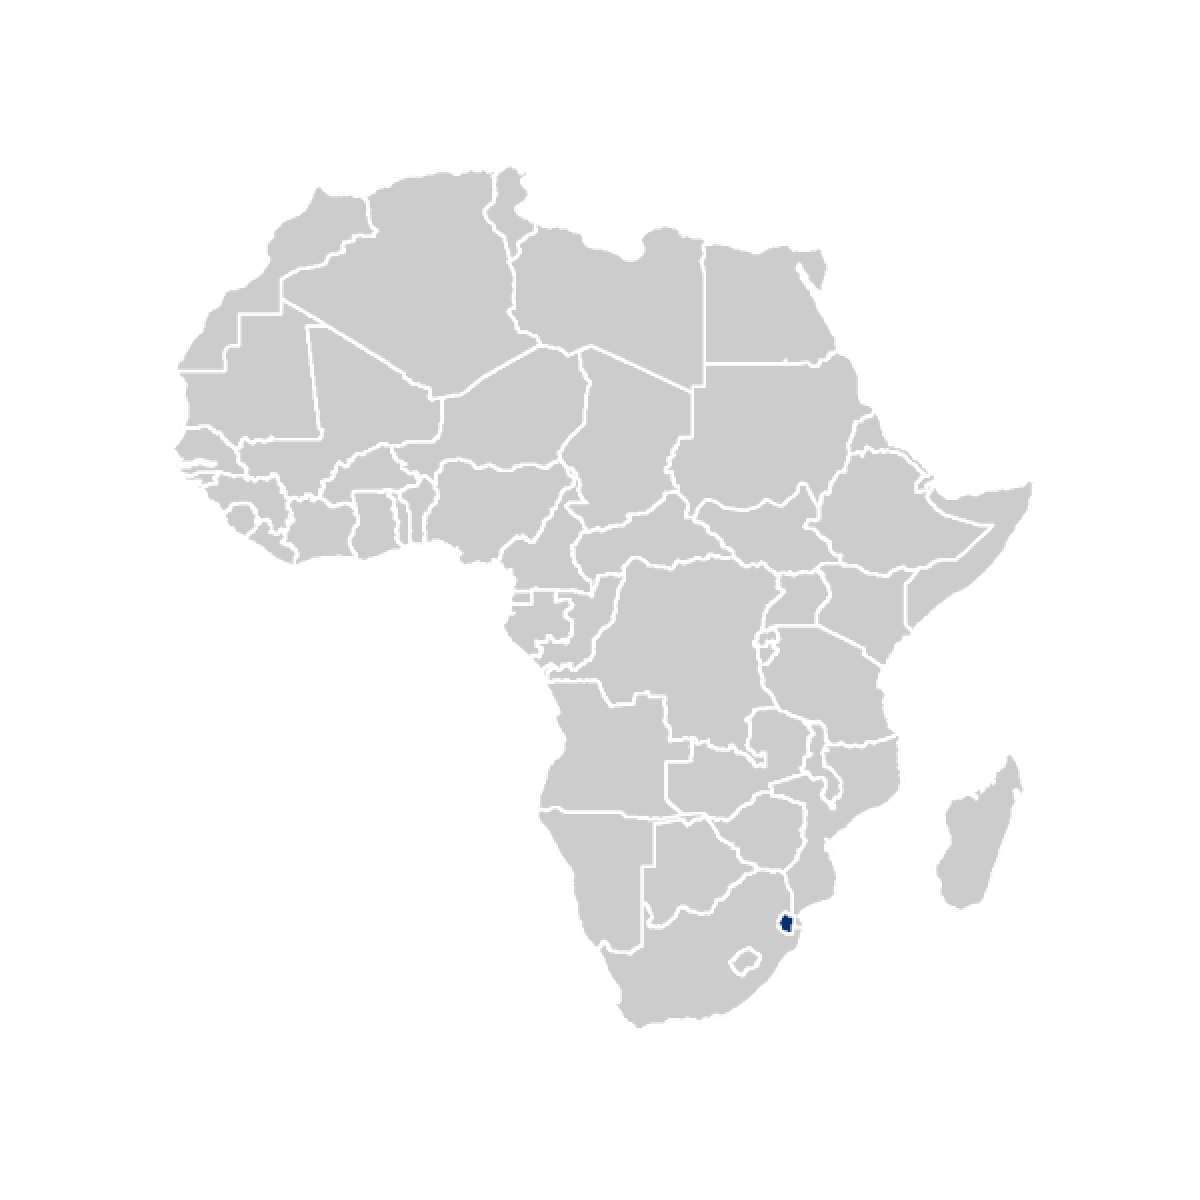 Eswatini highlighted on map of Africa